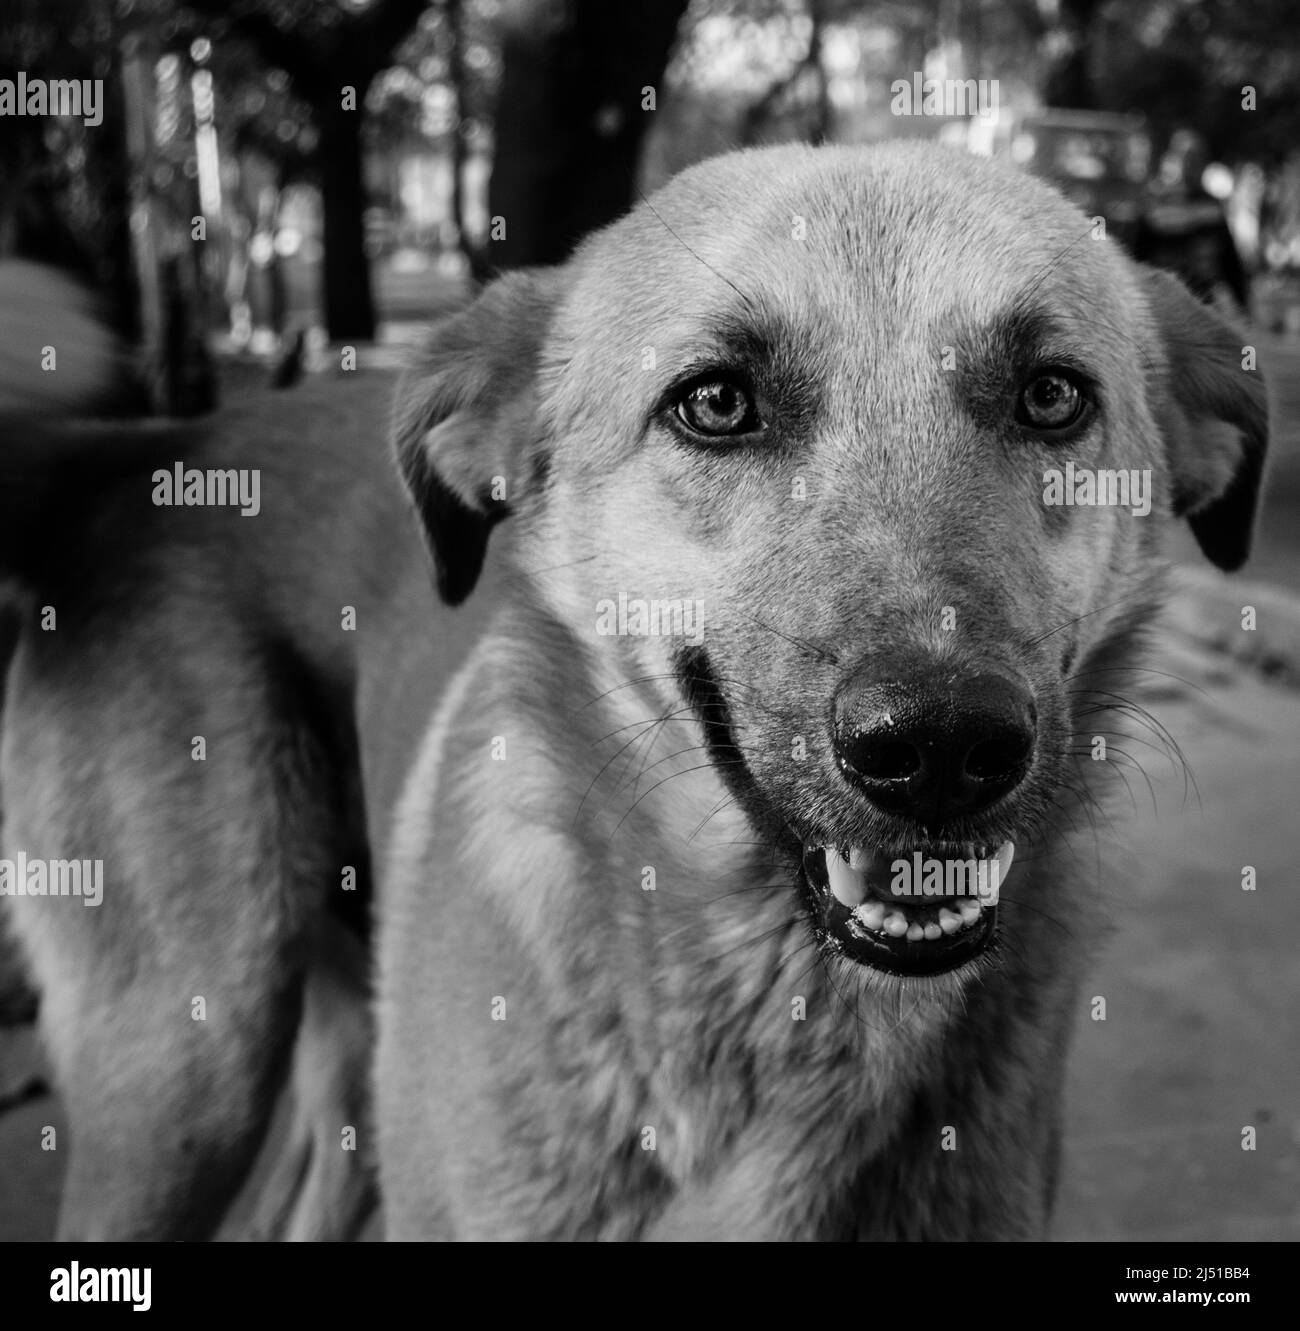 A close up of a stray dog with mouth open in black and white. Stock Photo